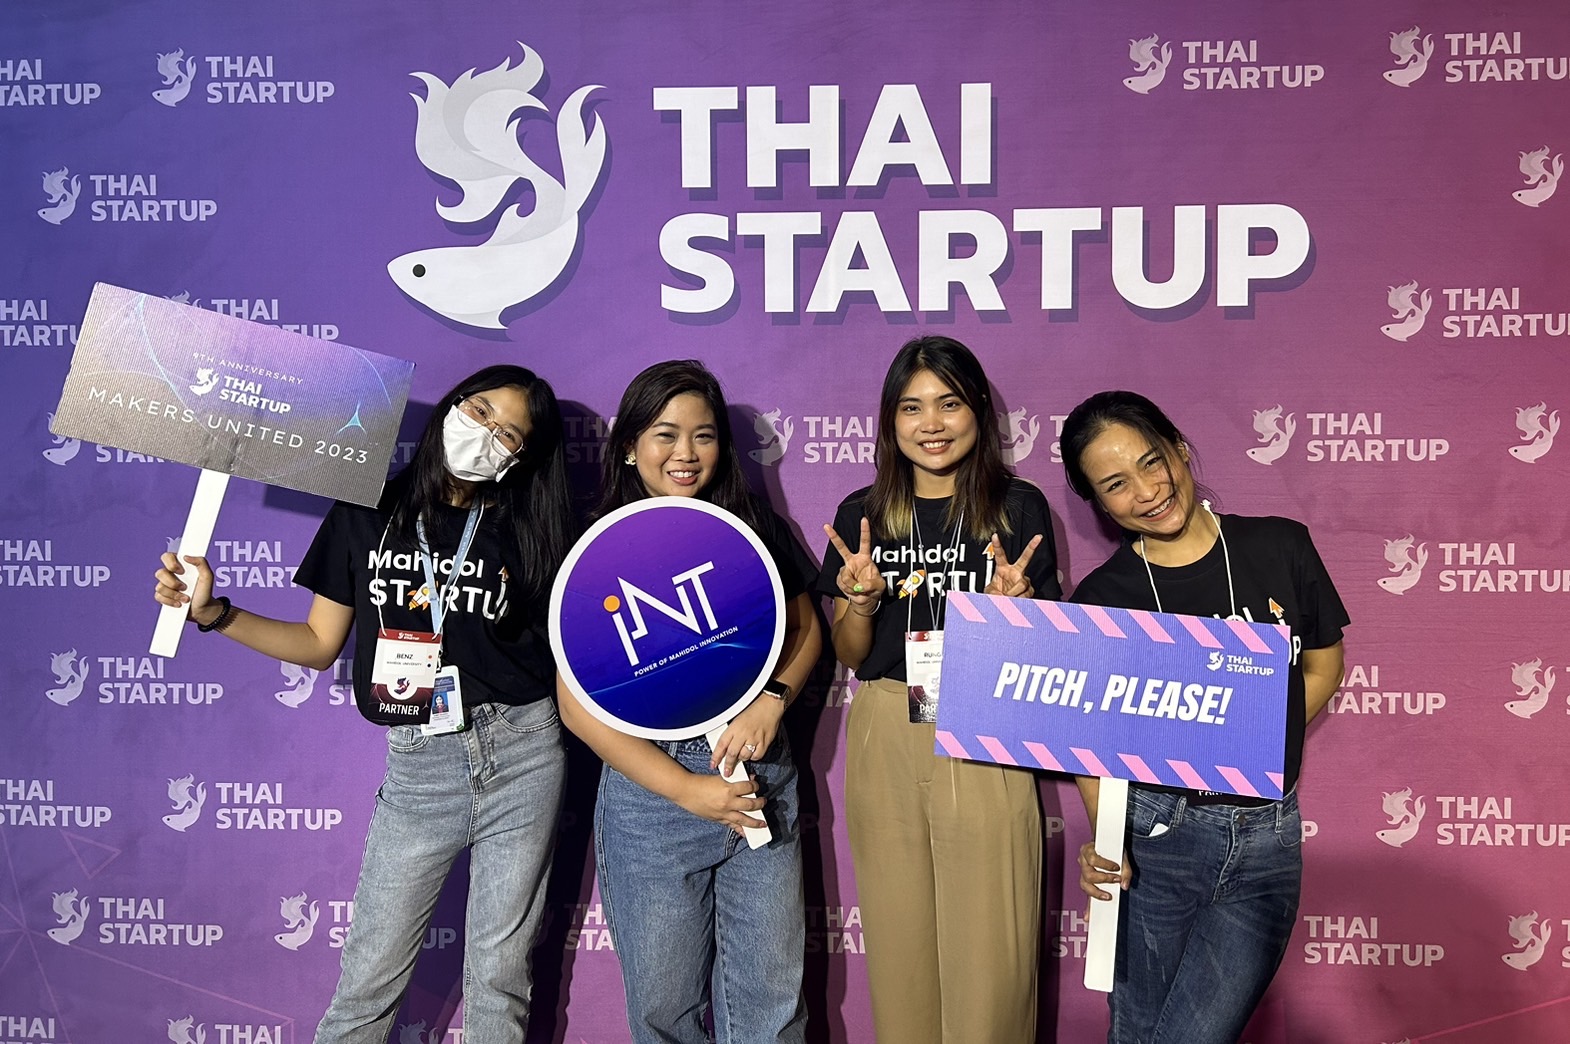 Makers United 2023 by Thai Startup